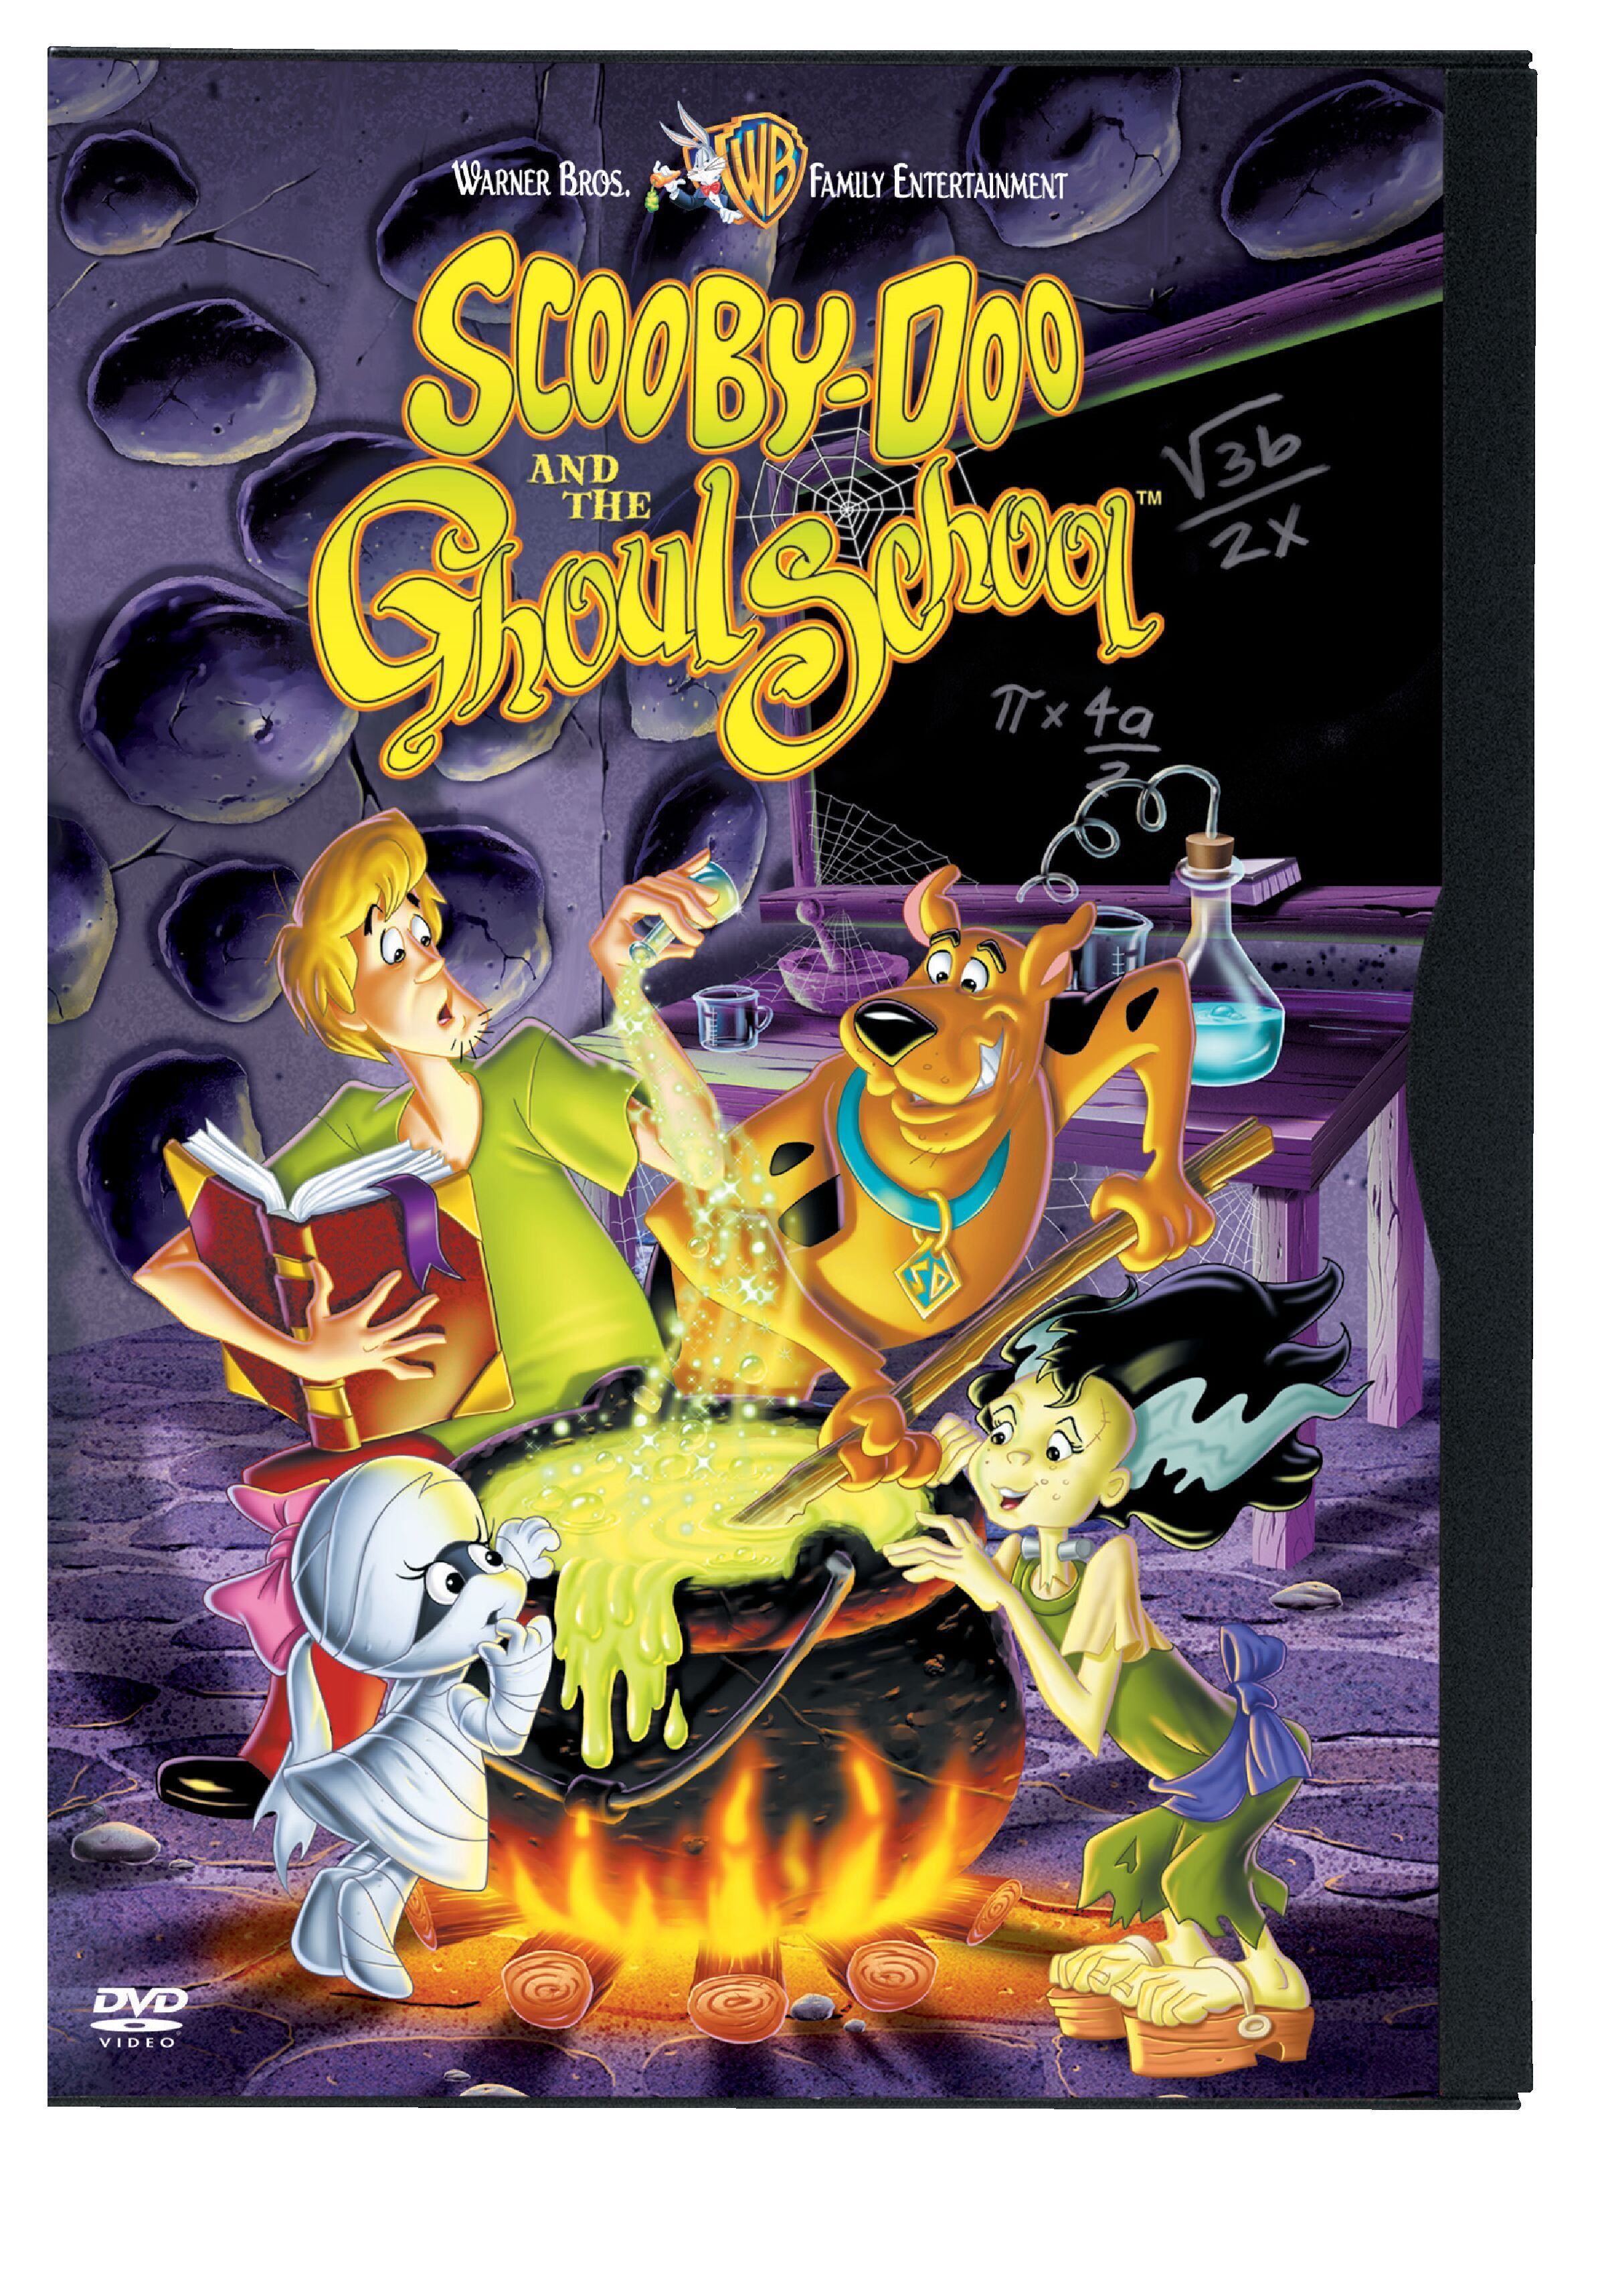 Scooby-Doo: The Ghoul School - DVD [ 1988 ]  - Children Movies On DVD - Movies On GRUV